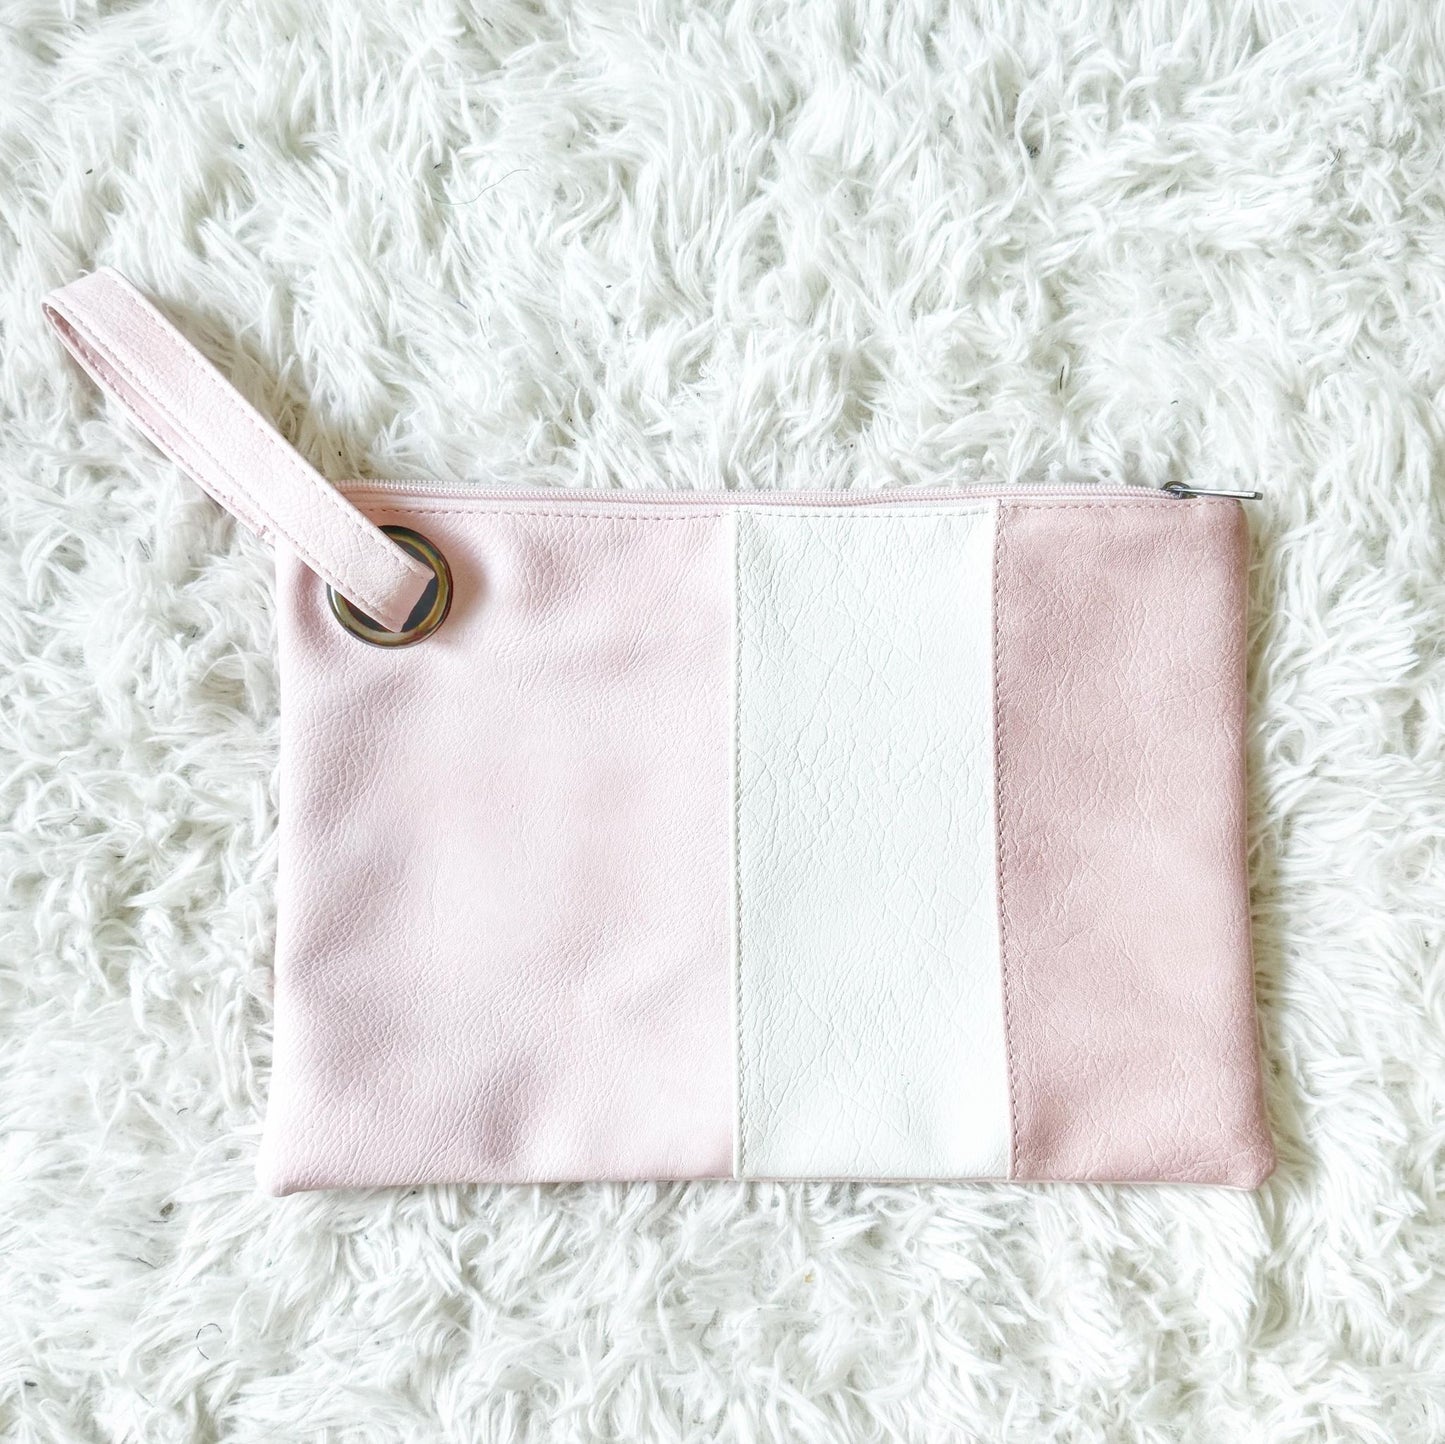 Oversized Clutch (more options/colors!)